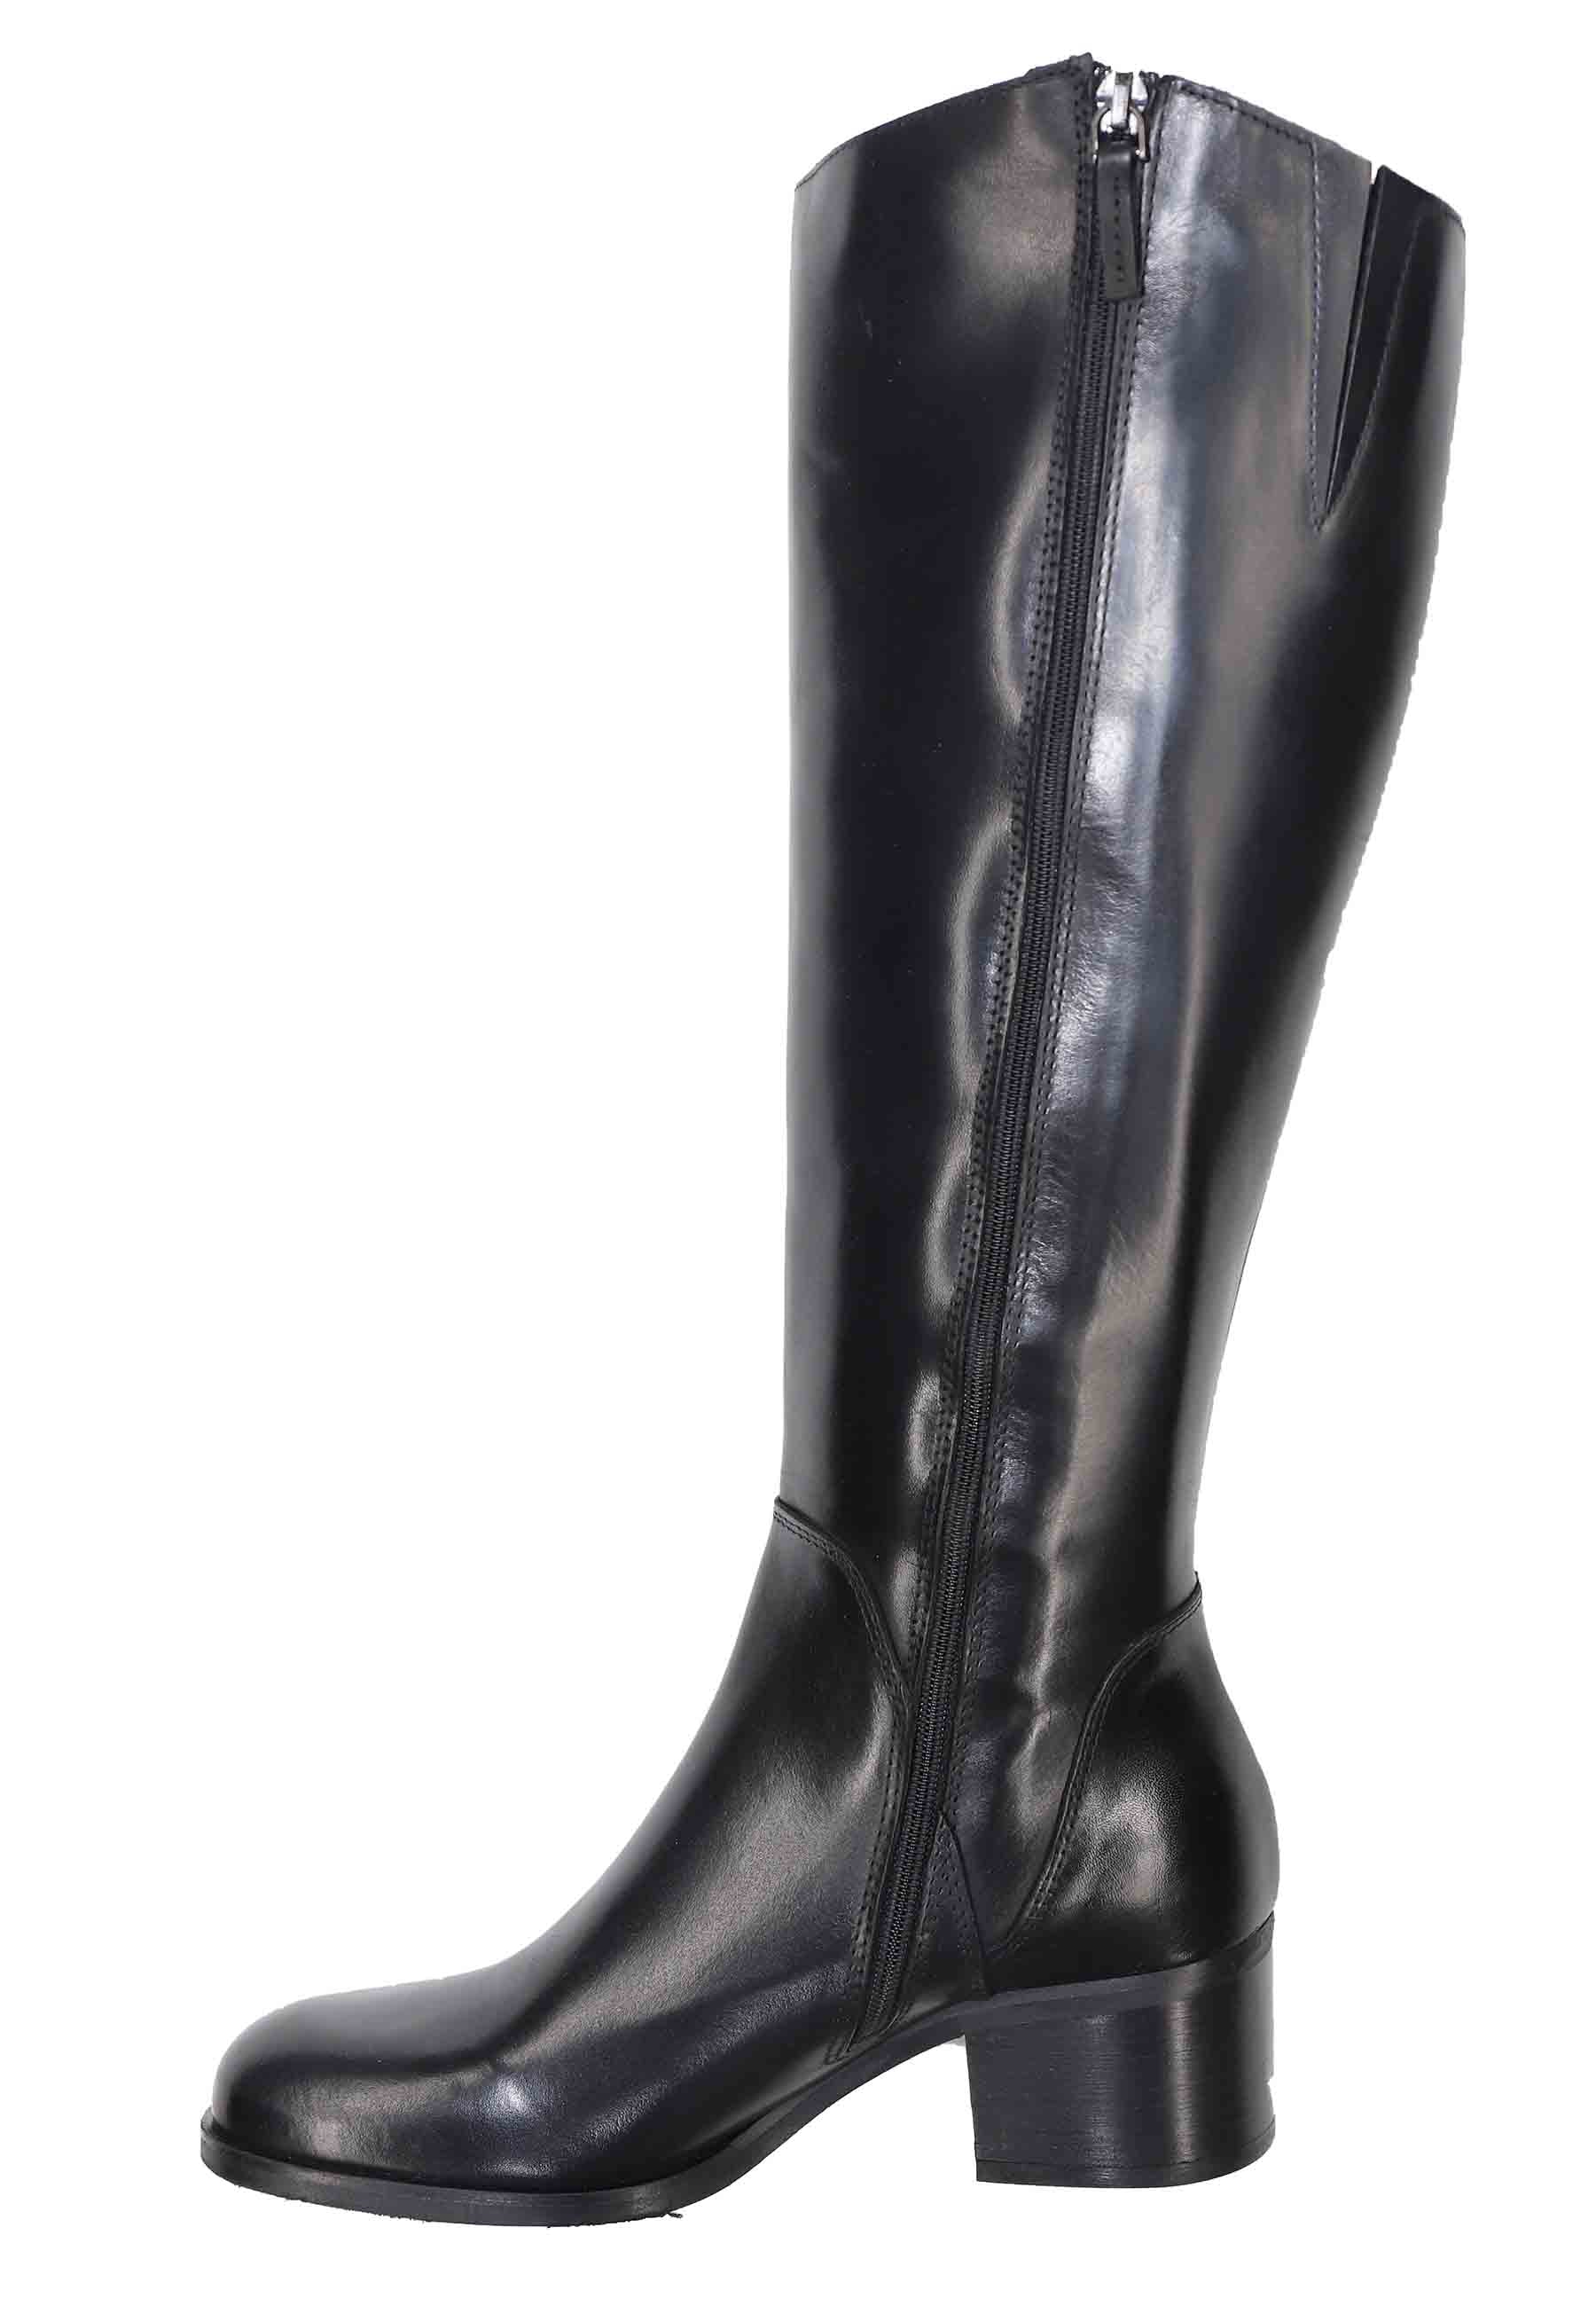 Women's black leather boots with leather heels